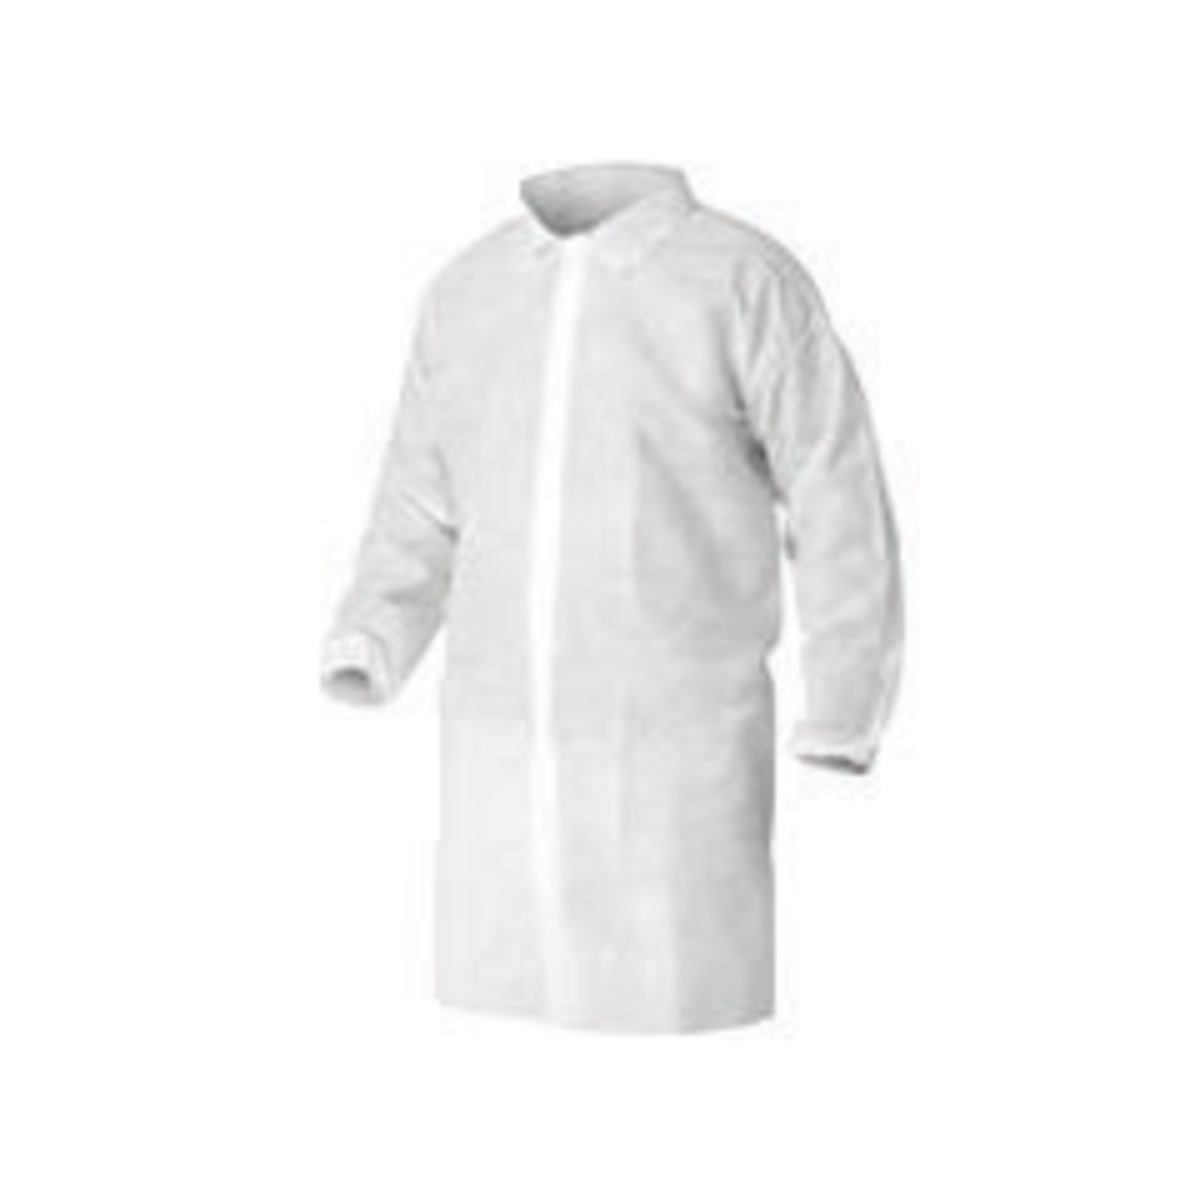 Kimberly-Clark Professional™ Large White KleenGuard™ A10 Polypropylene Disposable Lab Coat (Availability restrictions apply.)